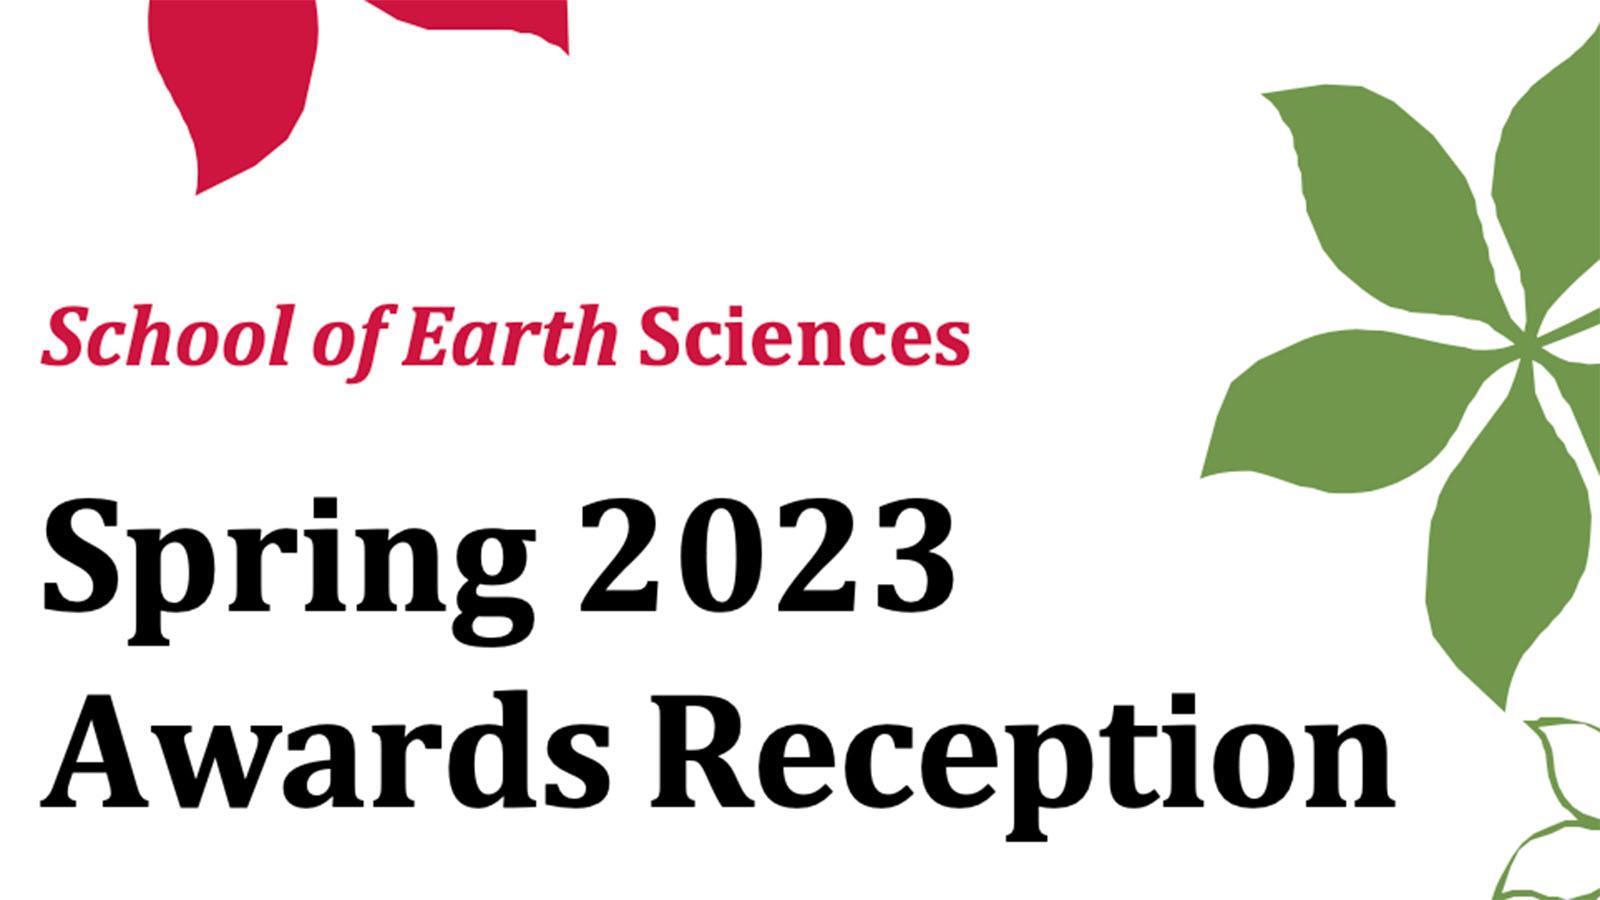 School of Earth Sciences Spring 2023 Awards Reception title with buckeye decorations